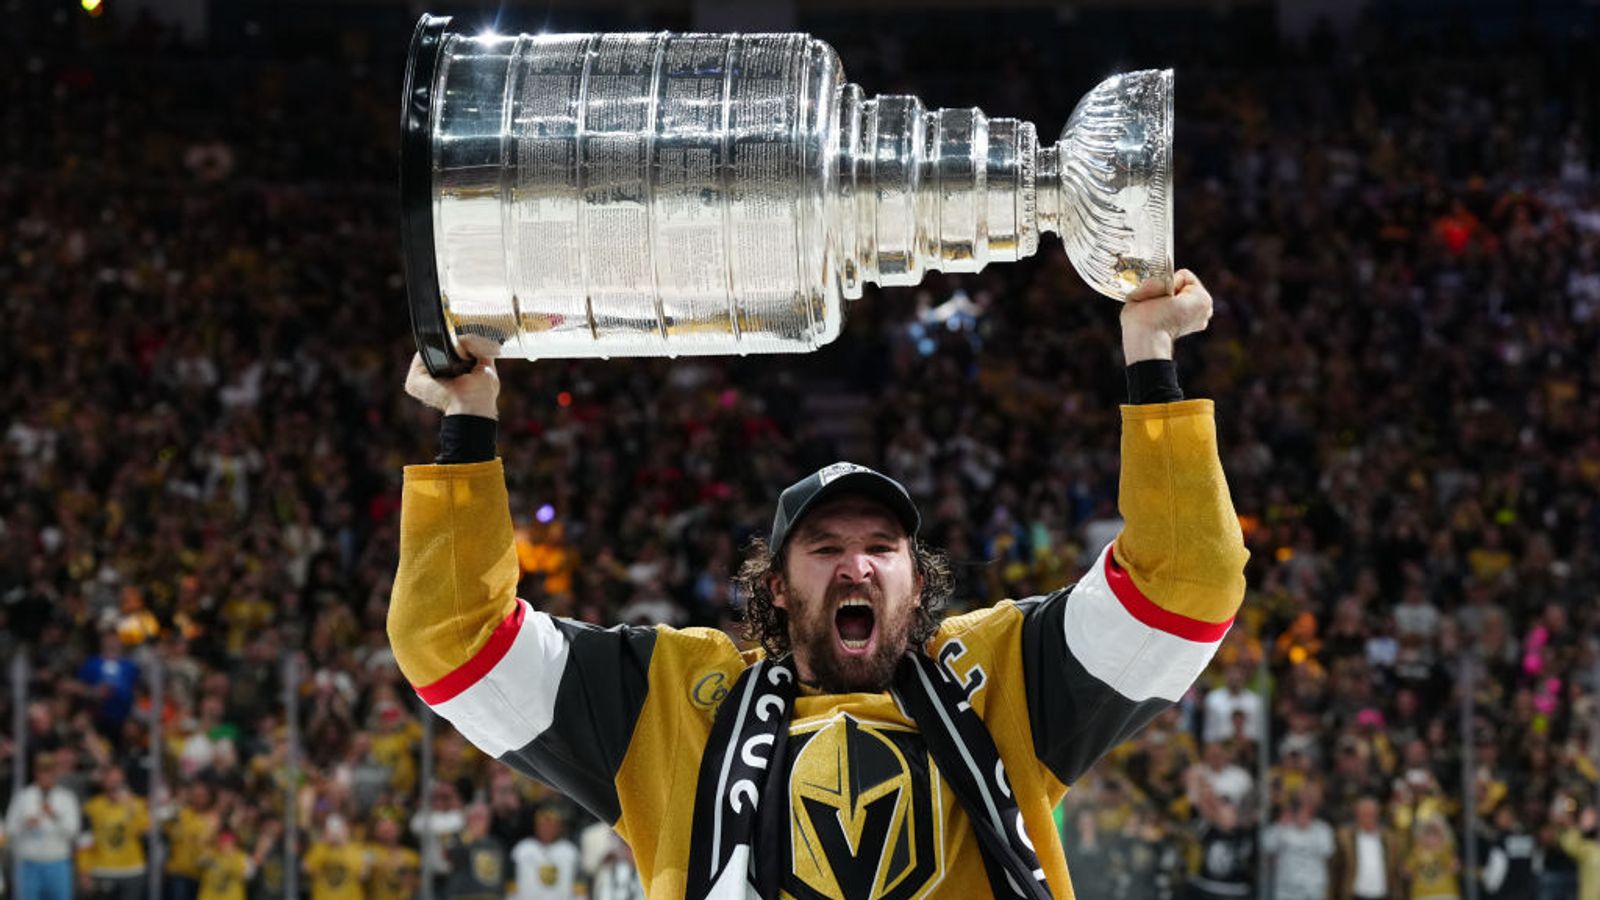 Vegas Golden Knights 2023 Stanley Cup Champions Book: It Hurts to